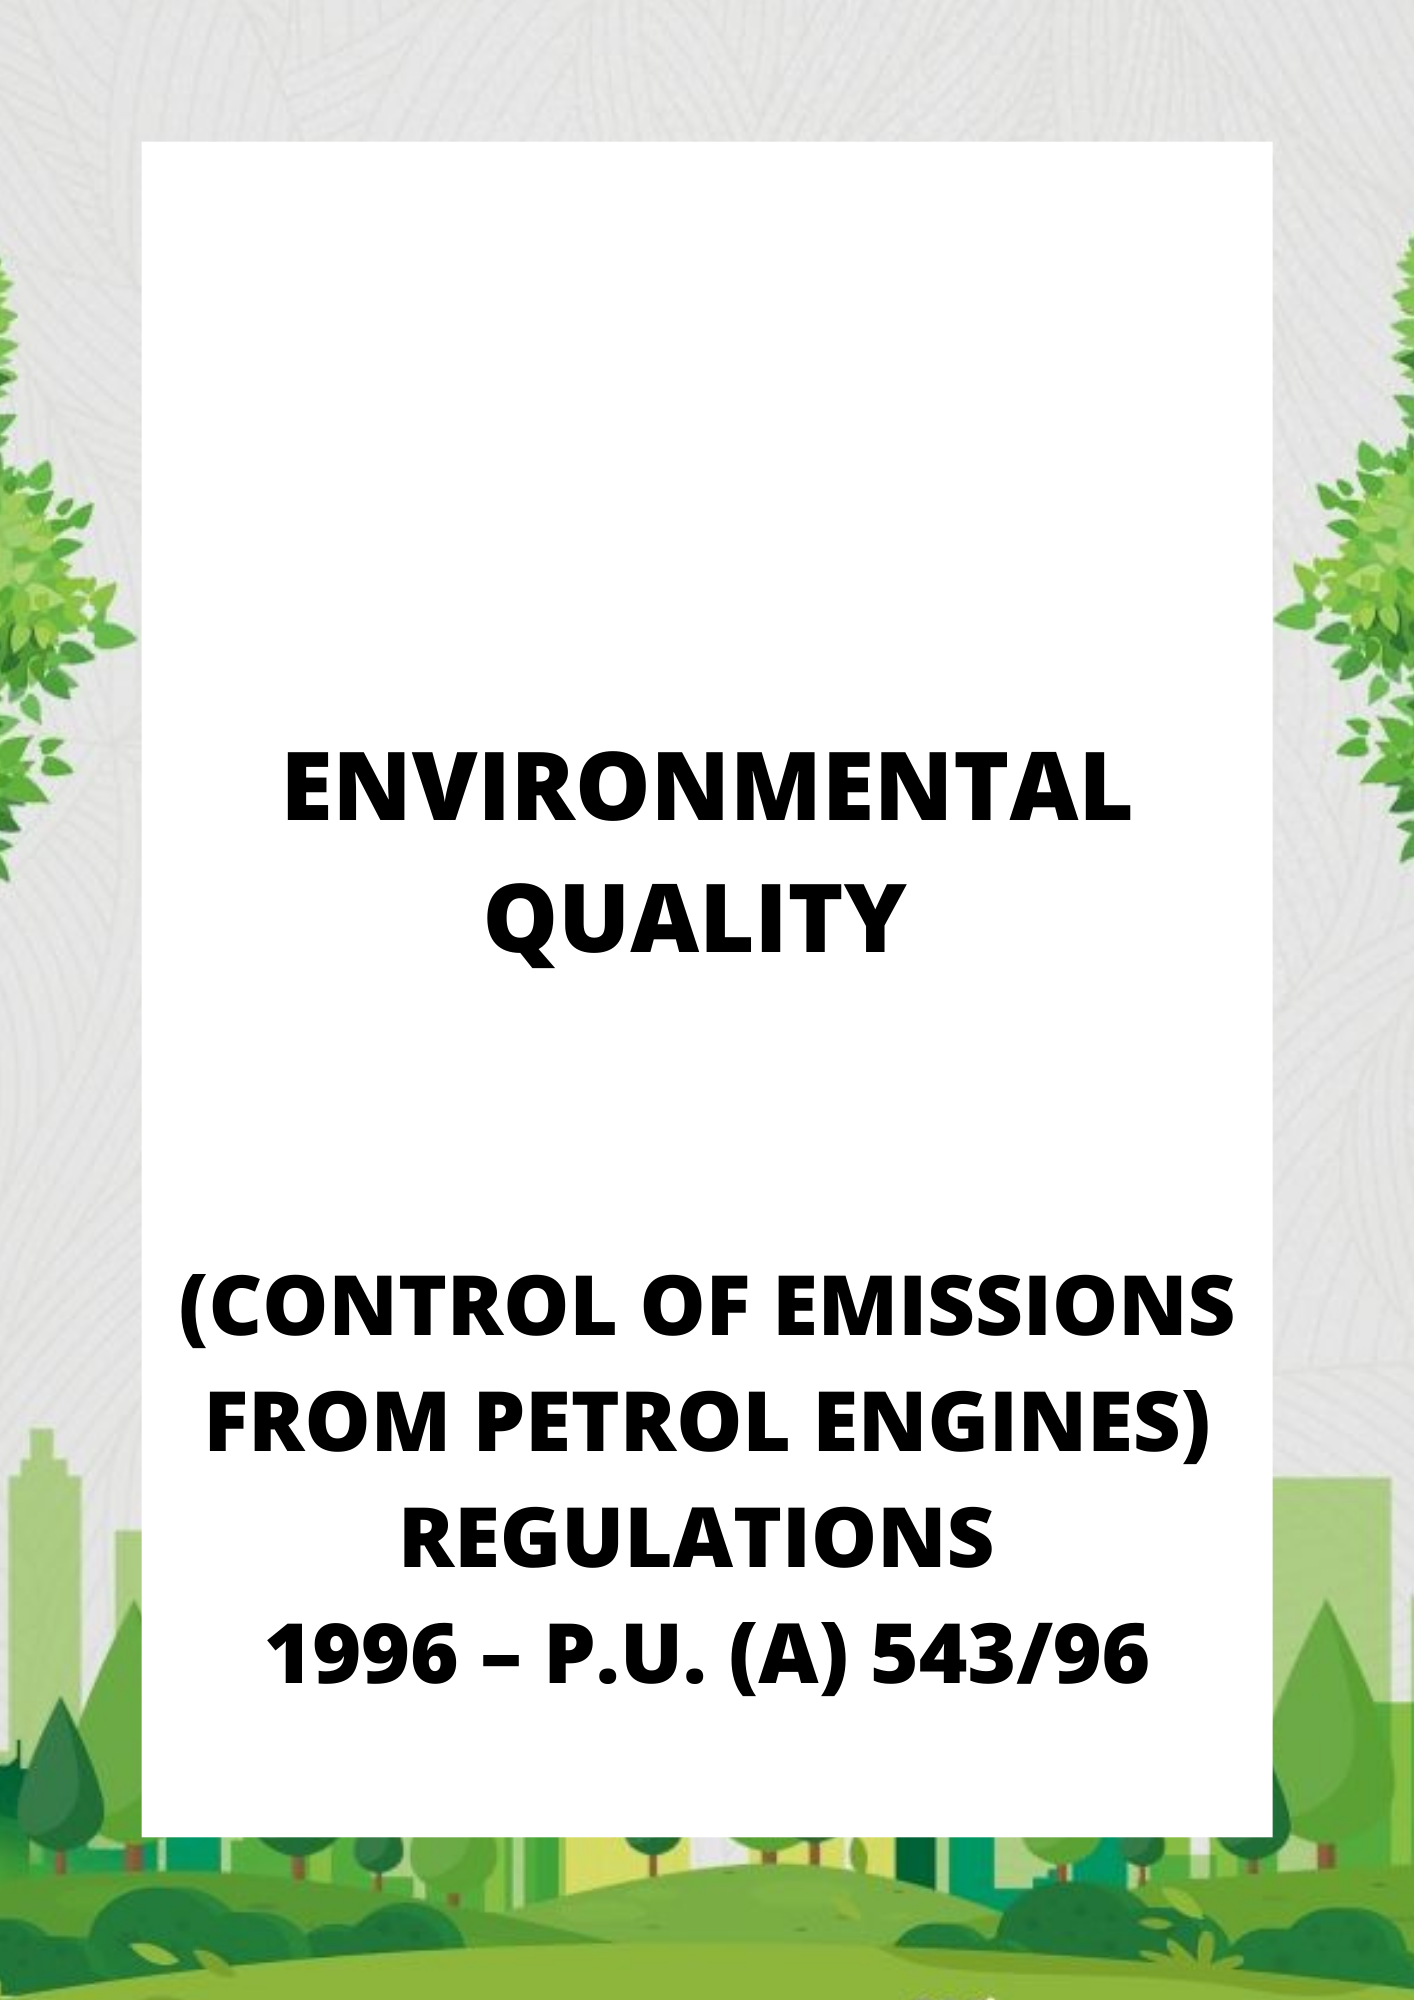 Environmental Quality (Control of Emissions from Petrol Engines) Regulations 1996 – P.U. (A) 54396